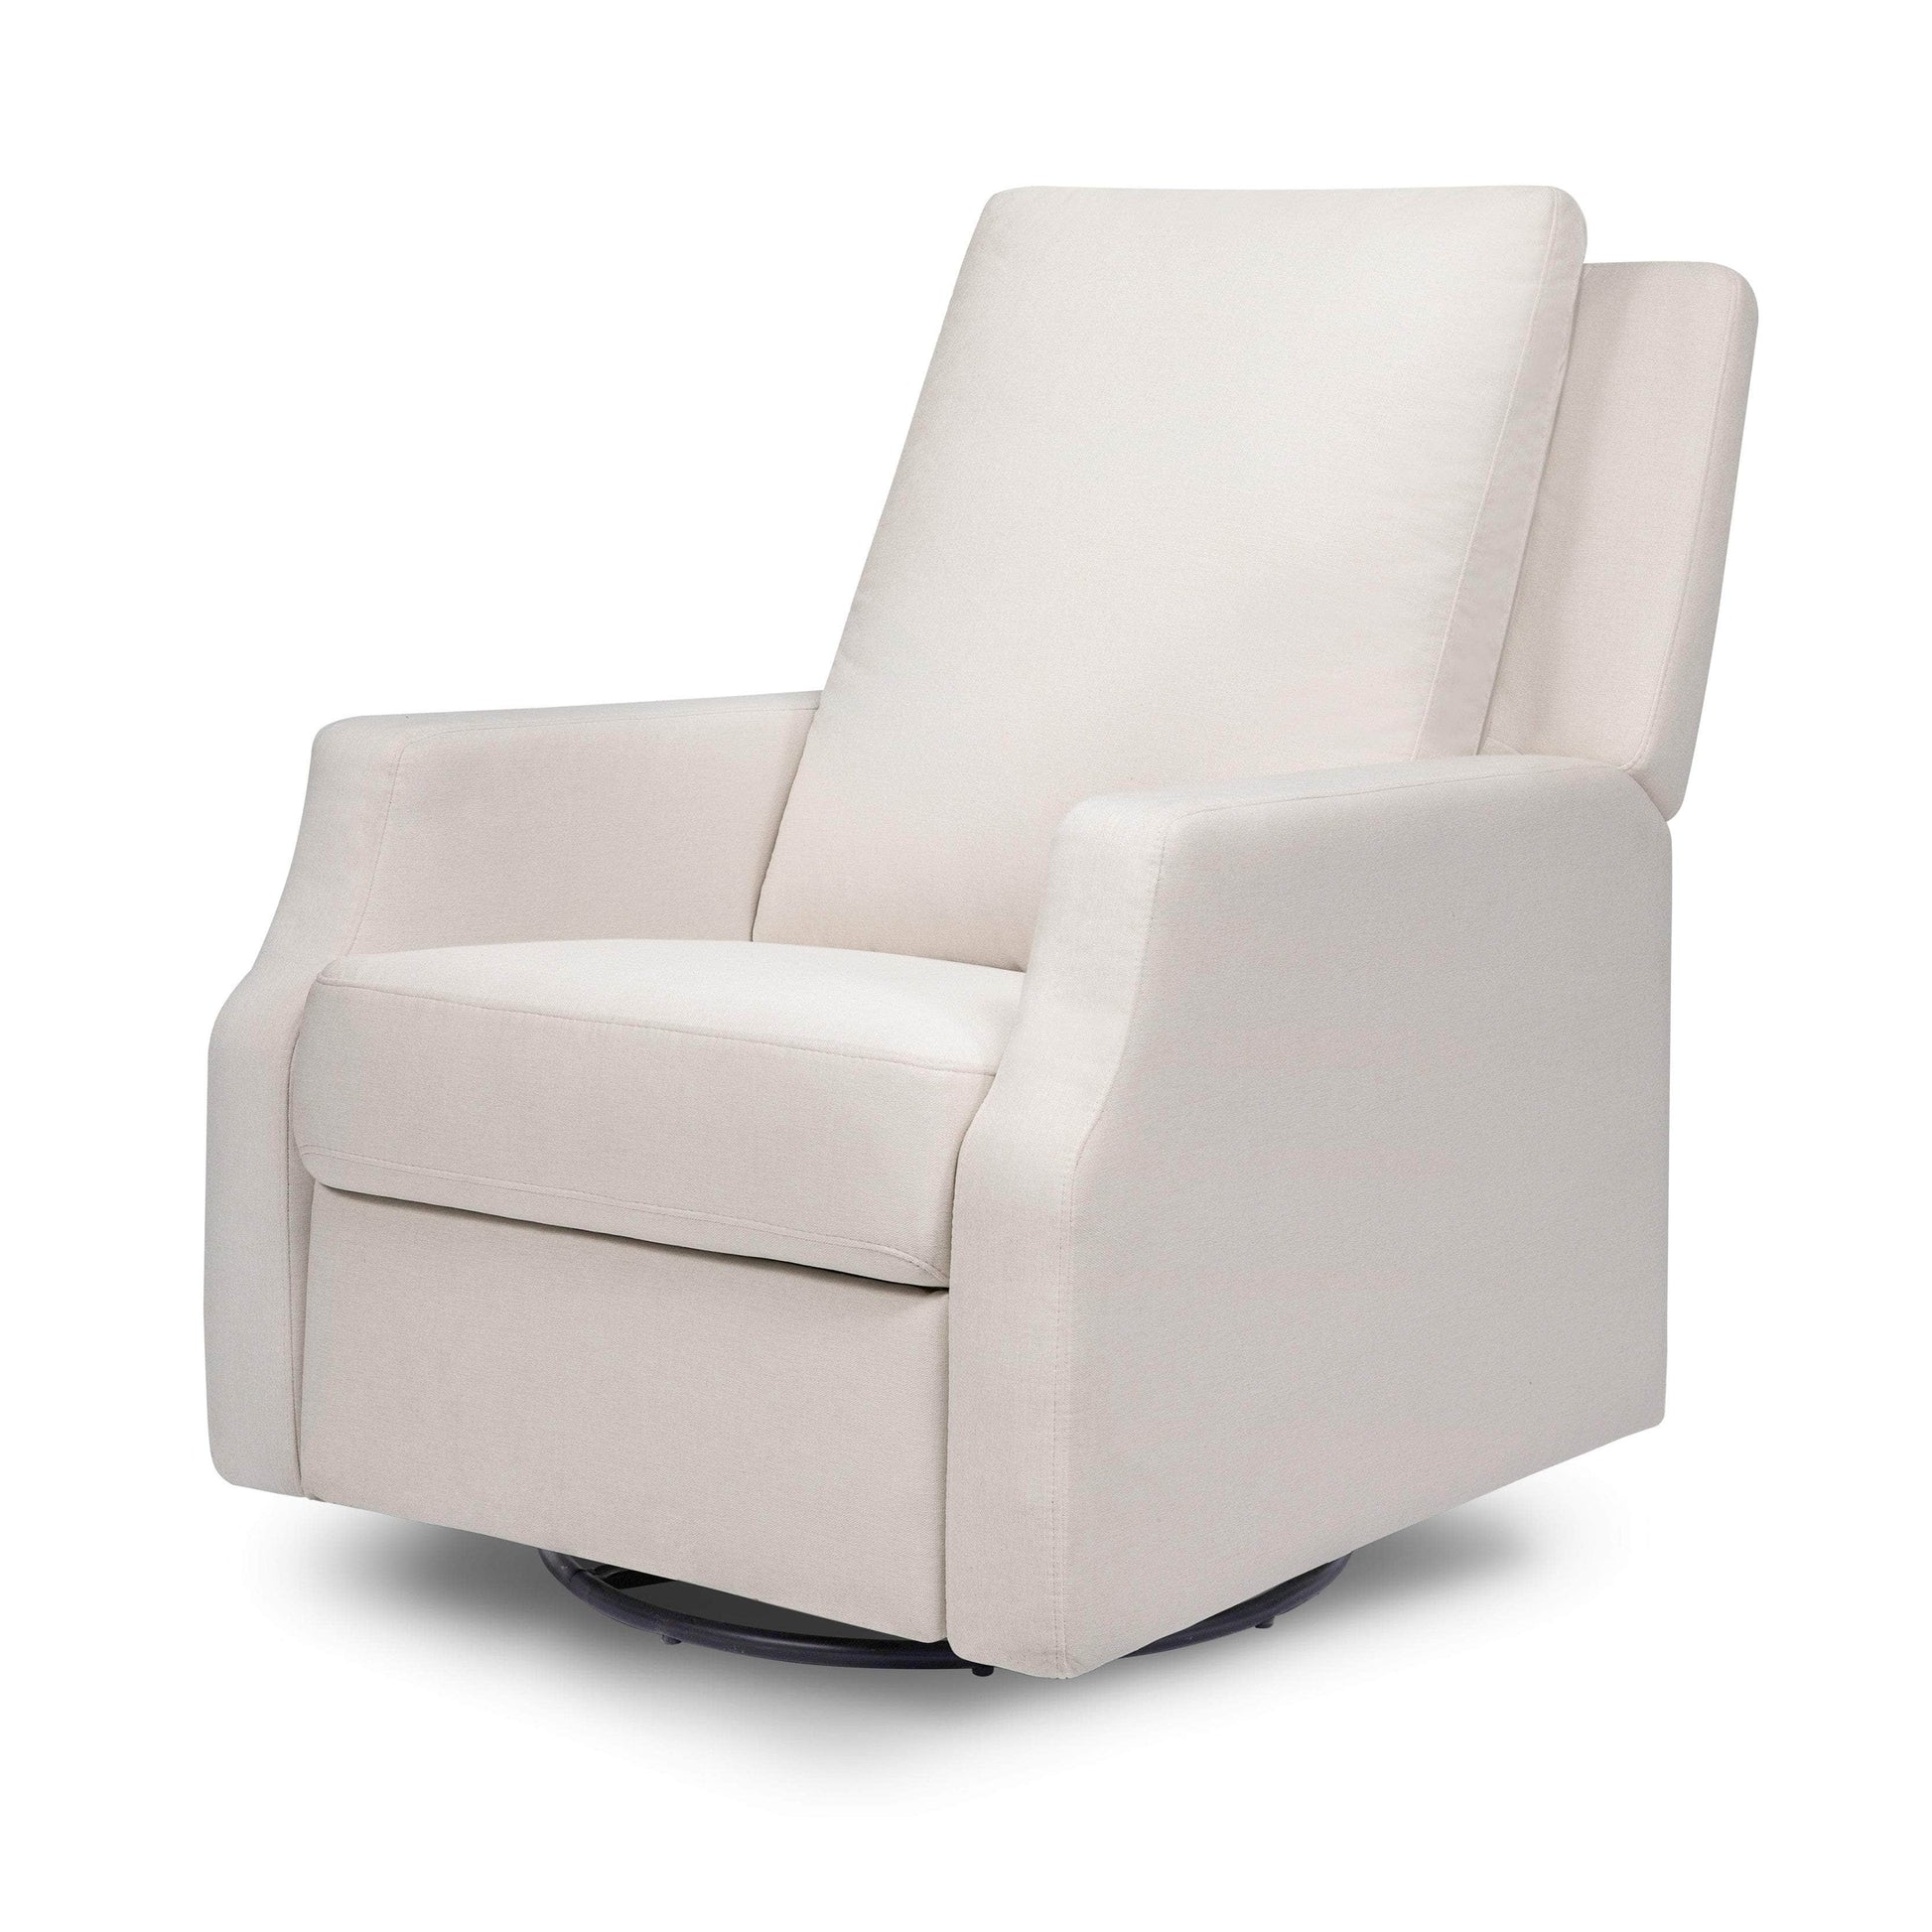 M22287PCMEW,Crewe Recliner and Swivel Glider in Performance Cream Eco-Weave